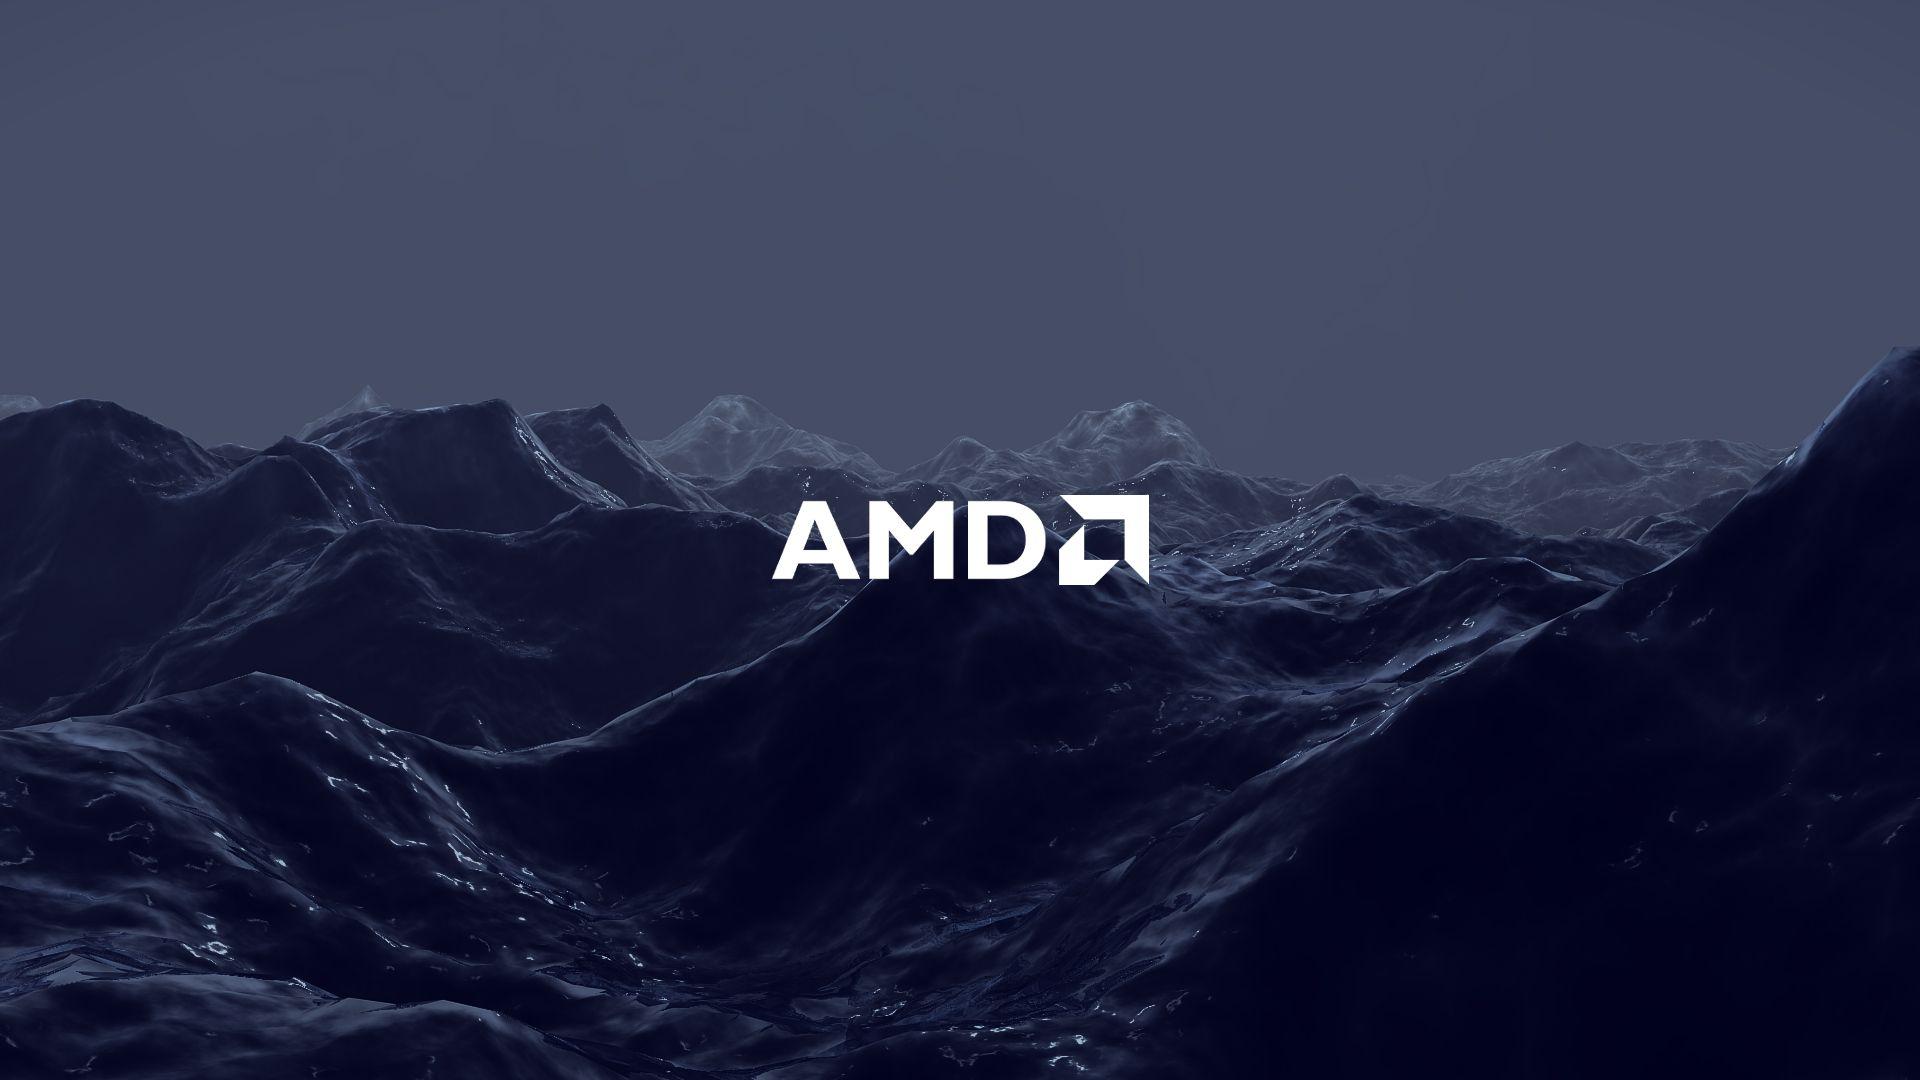 1920X1080 AMD Logo - Made wallpaper for NVIDIA and AMD users!